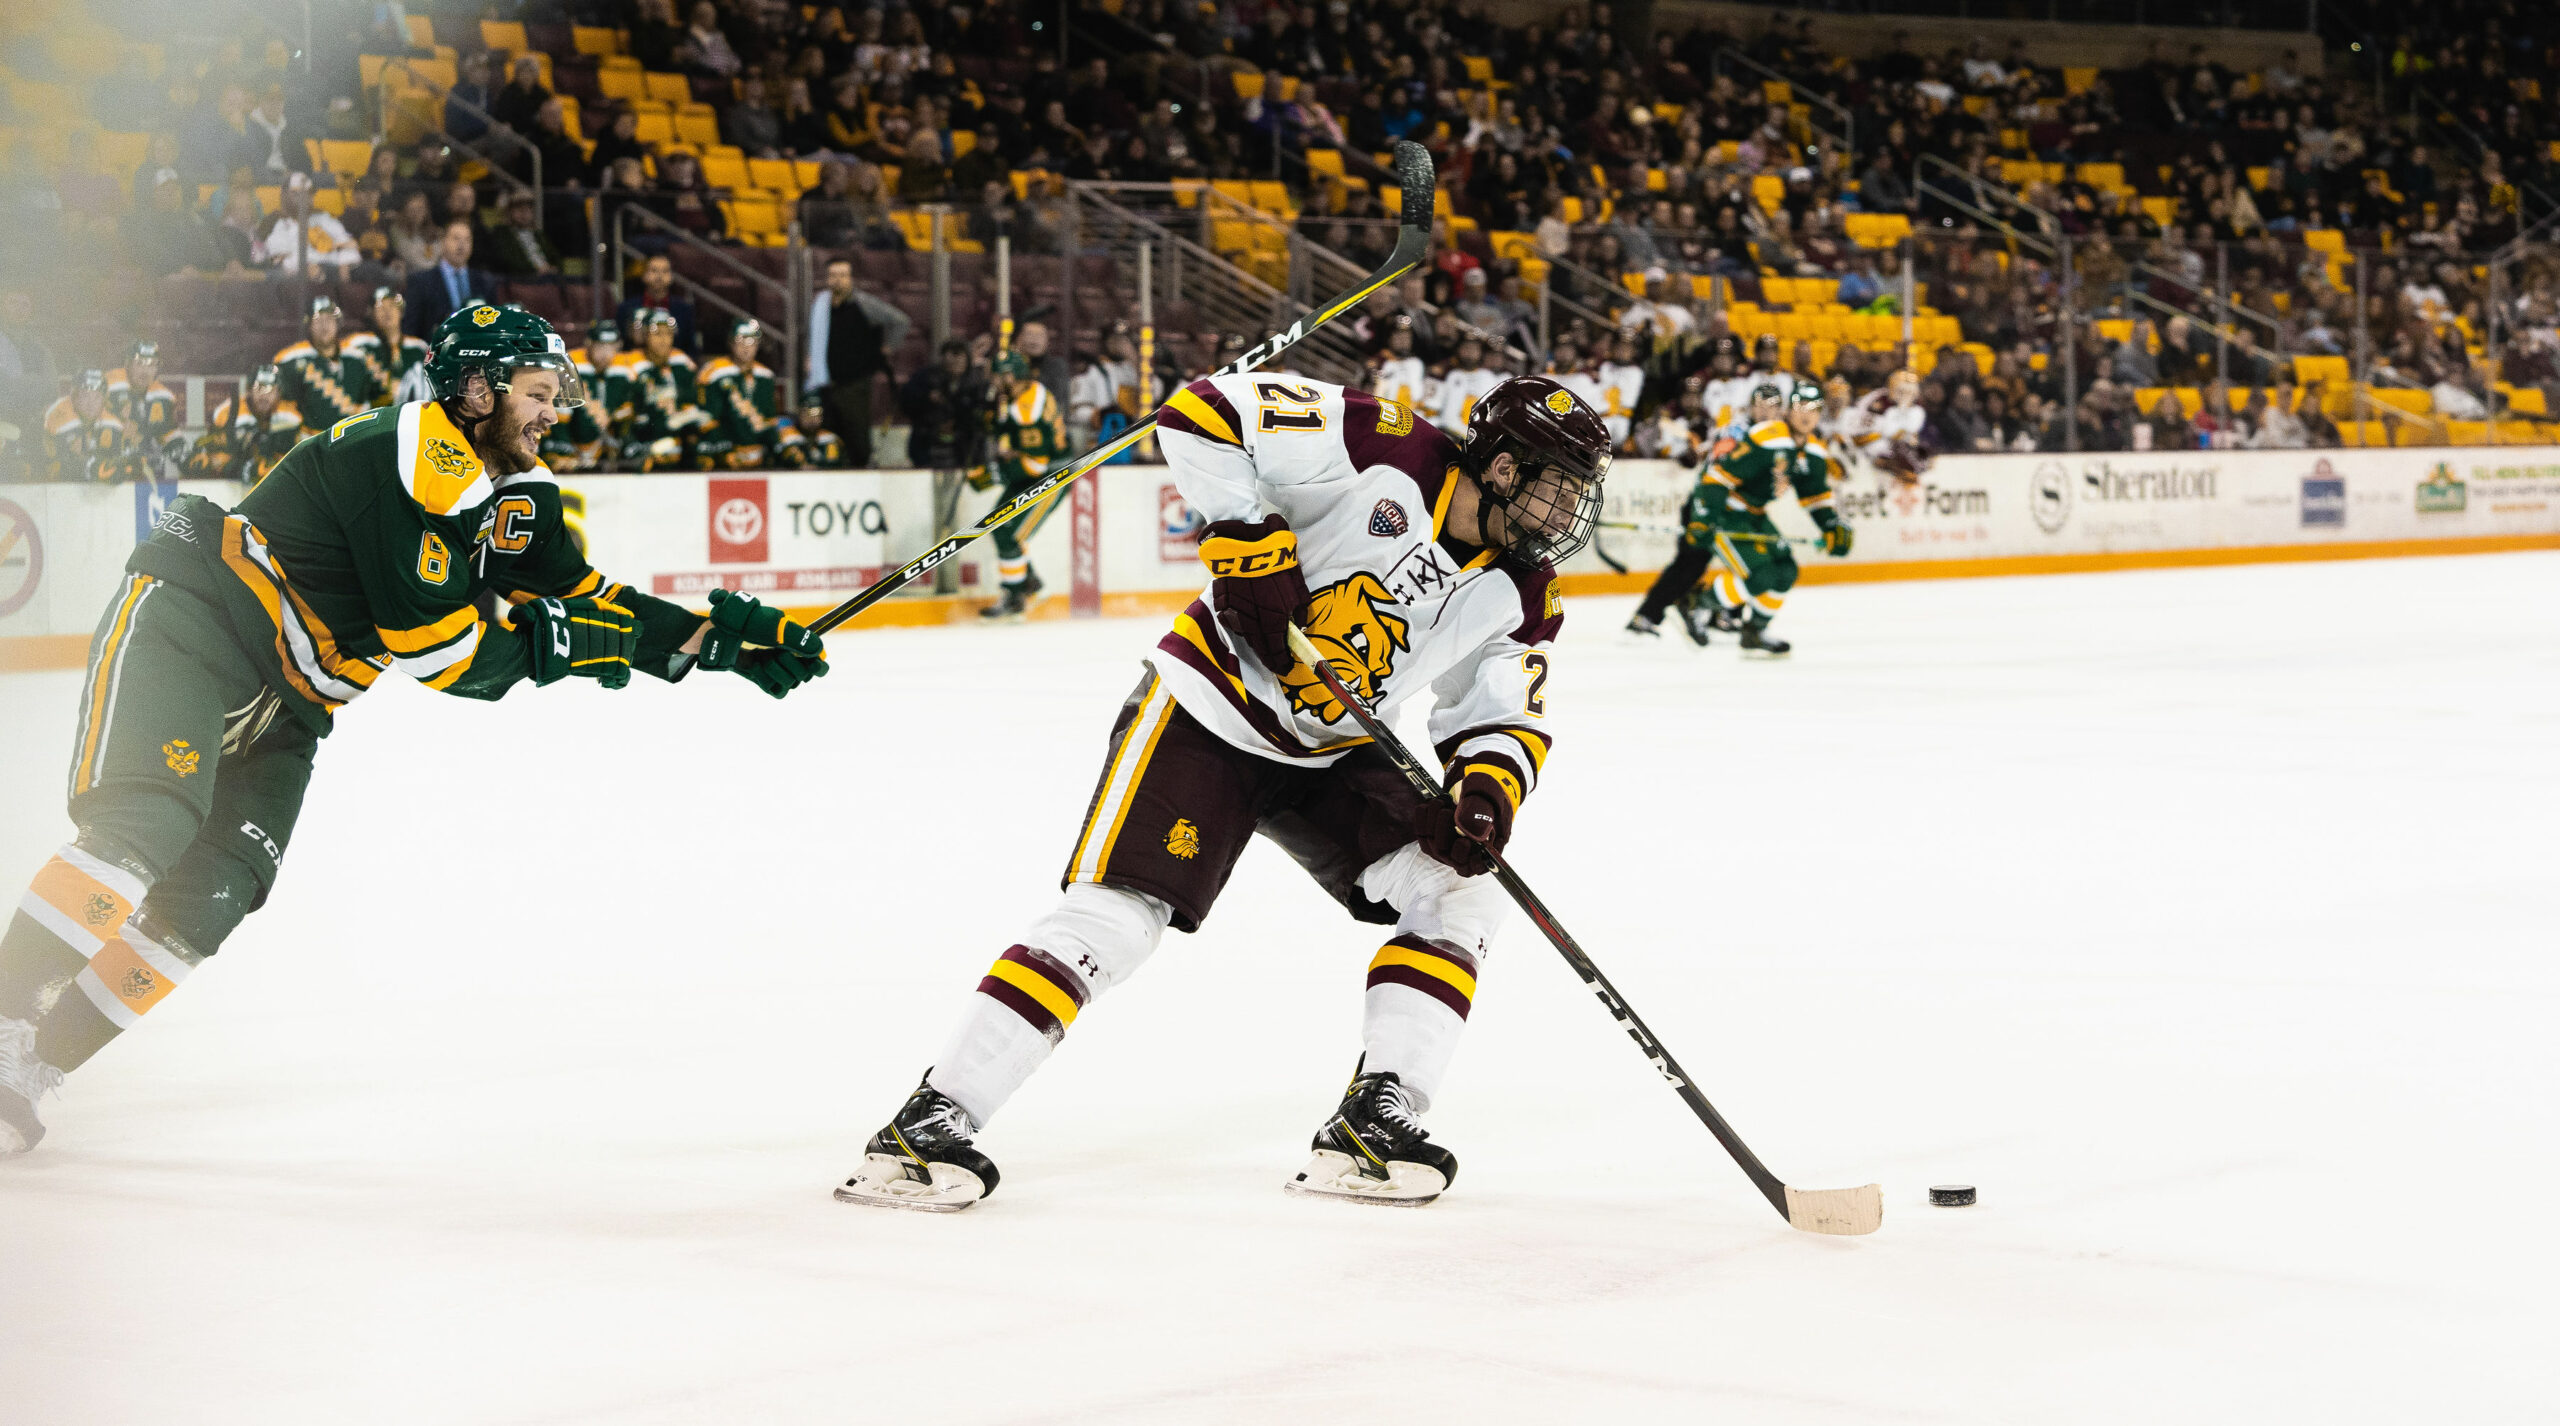 UMD Mens hockey game. A player is chasing the puck and another player is hitting him in the shoulder with his stick.